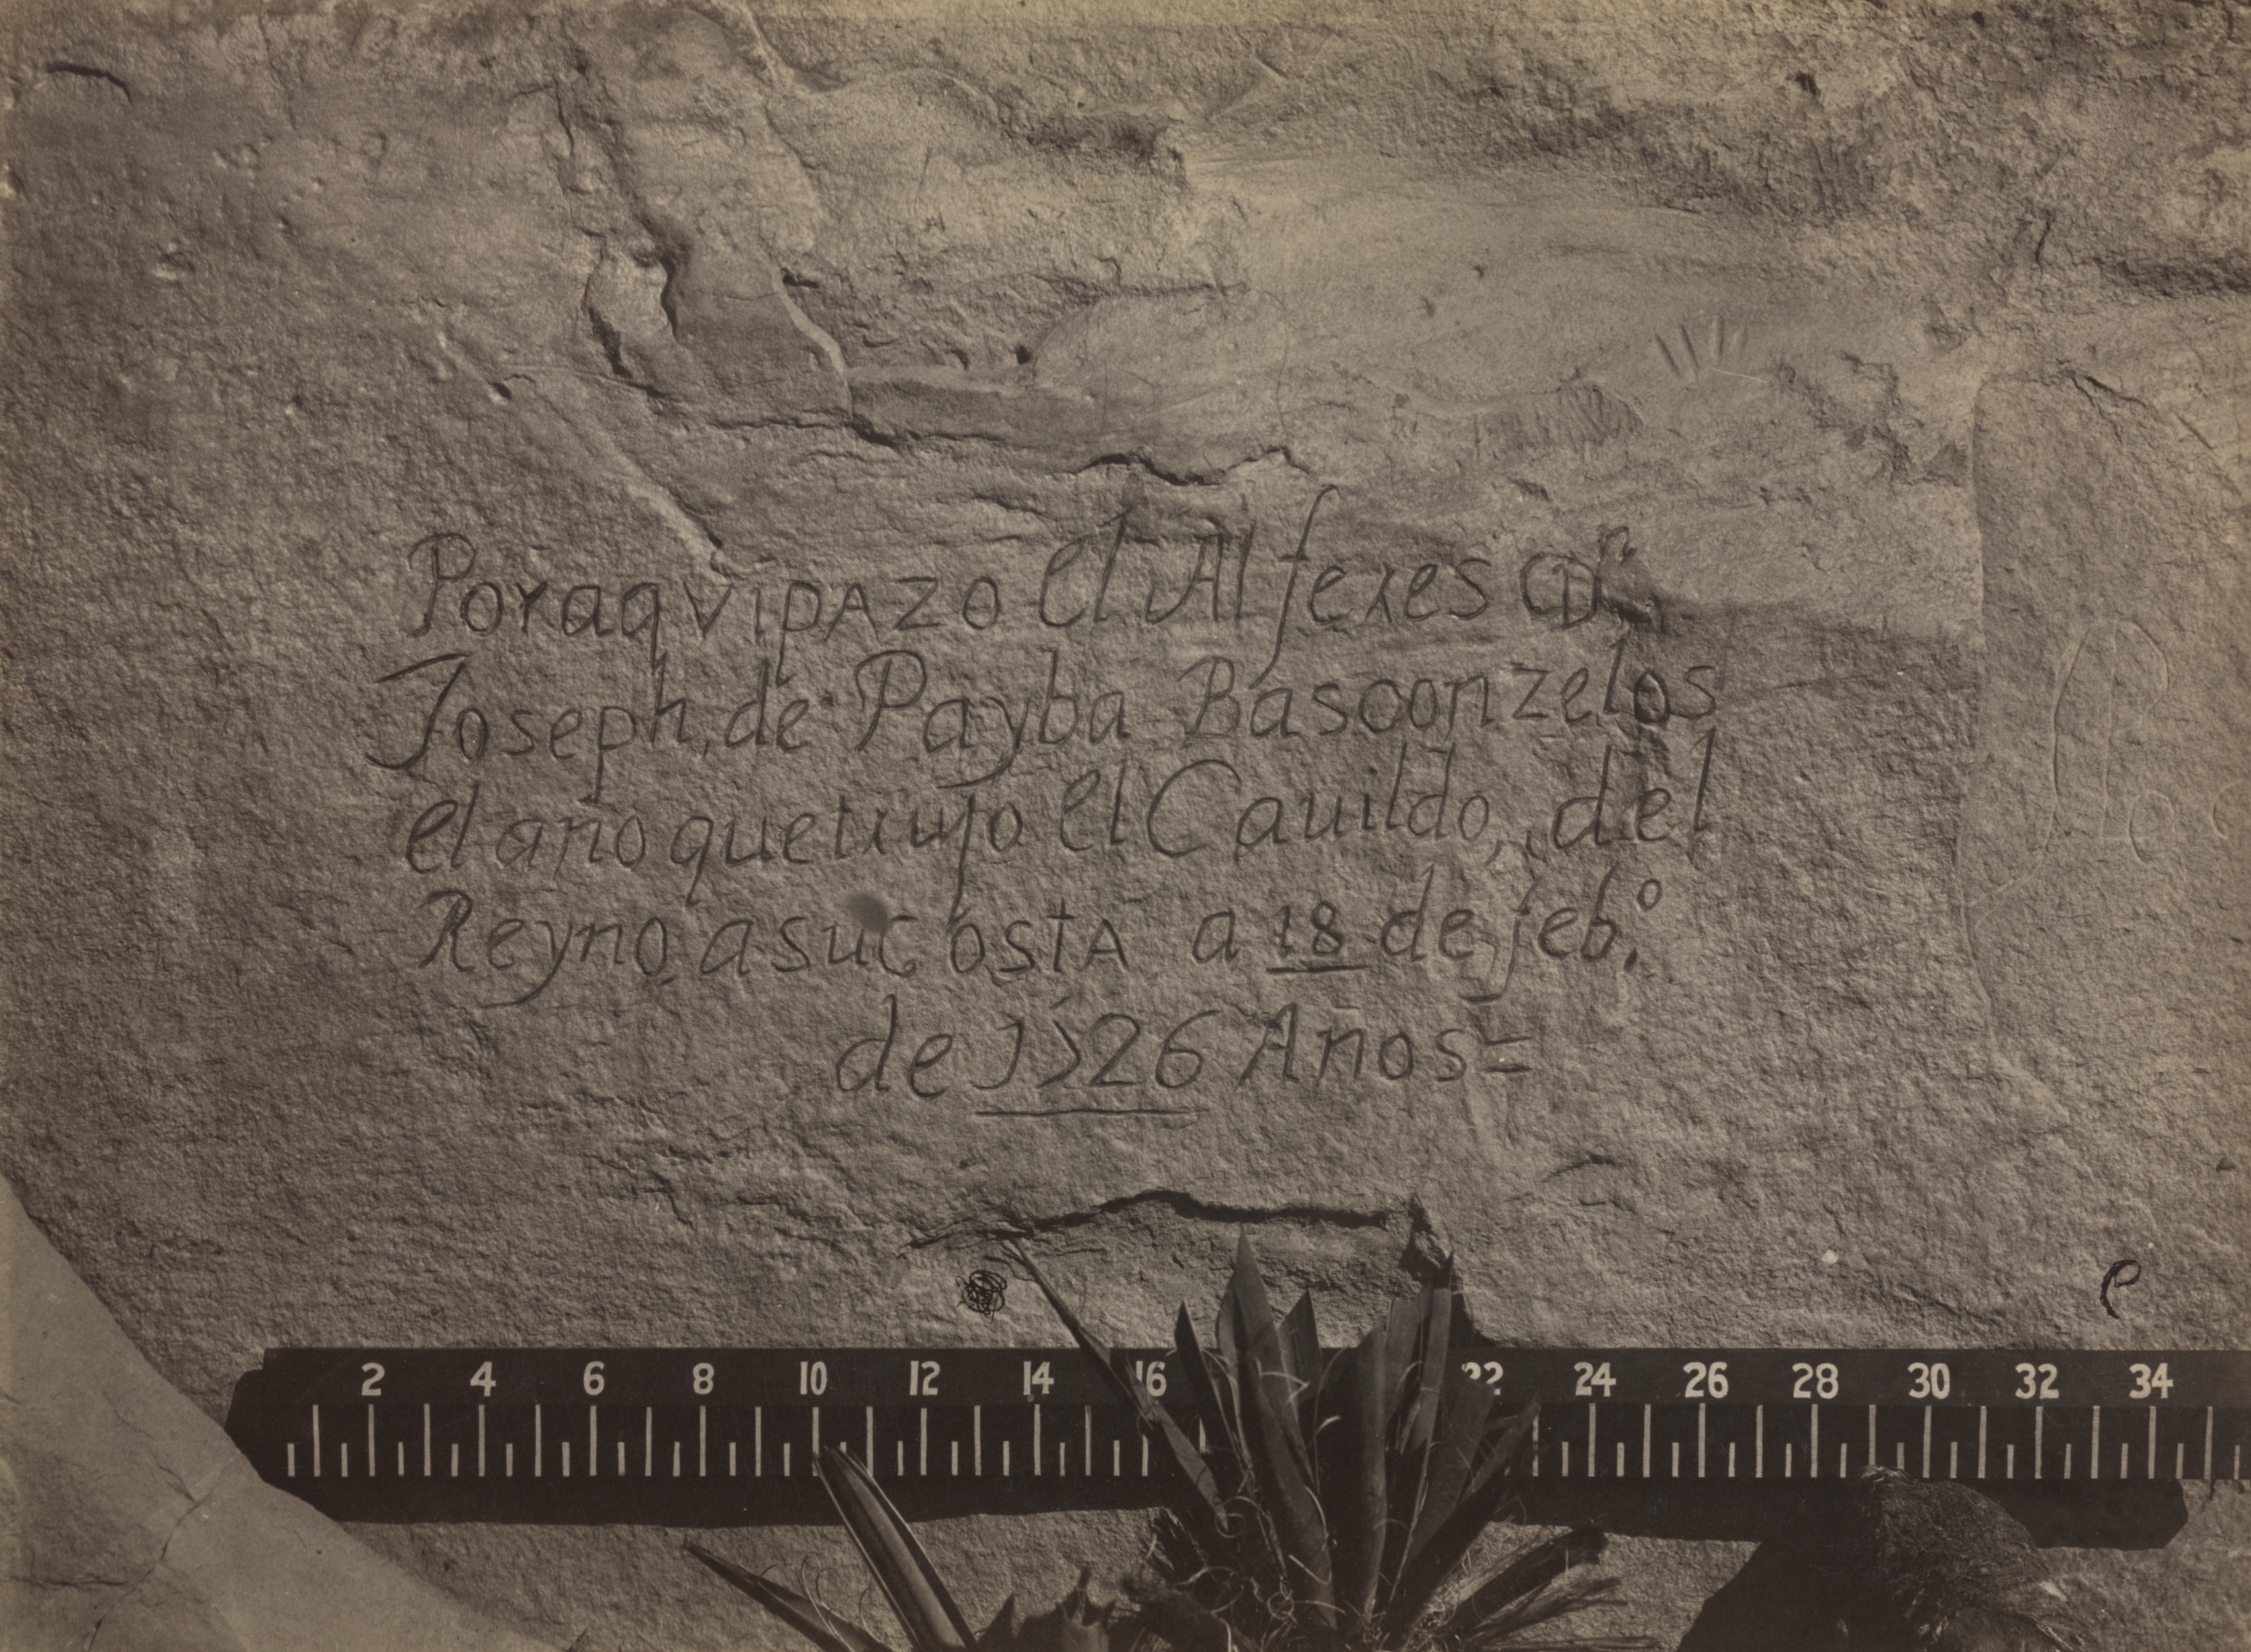 Historic Spanish Record of the Conquest, South Side of Inscription Rock, N.M., No. 3